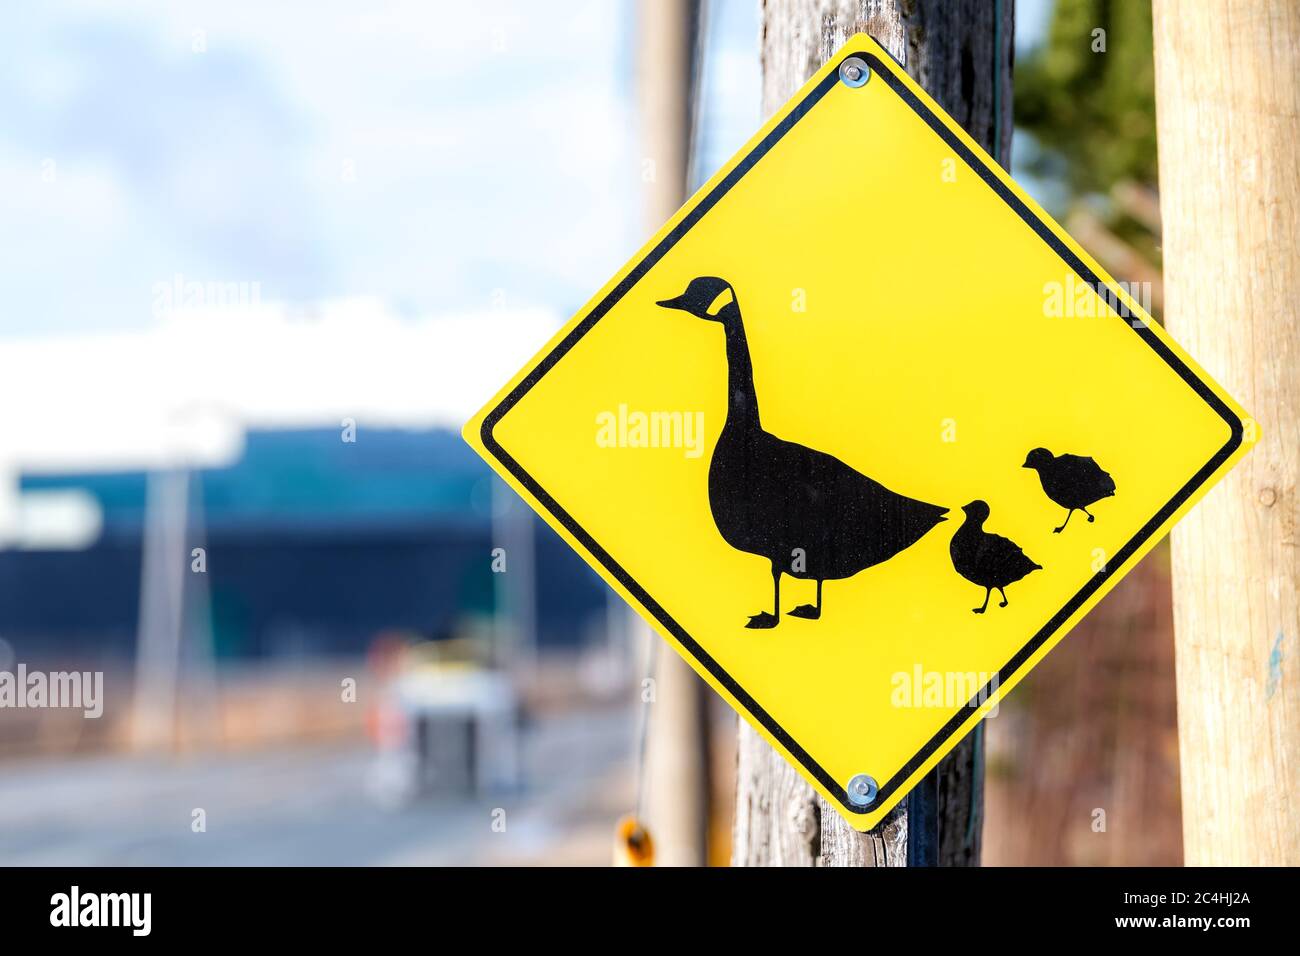 Duck or goose crossing sign at the side of a road. The sign shows a mother duck or goose and two ducklings or goslings. Stock Photo